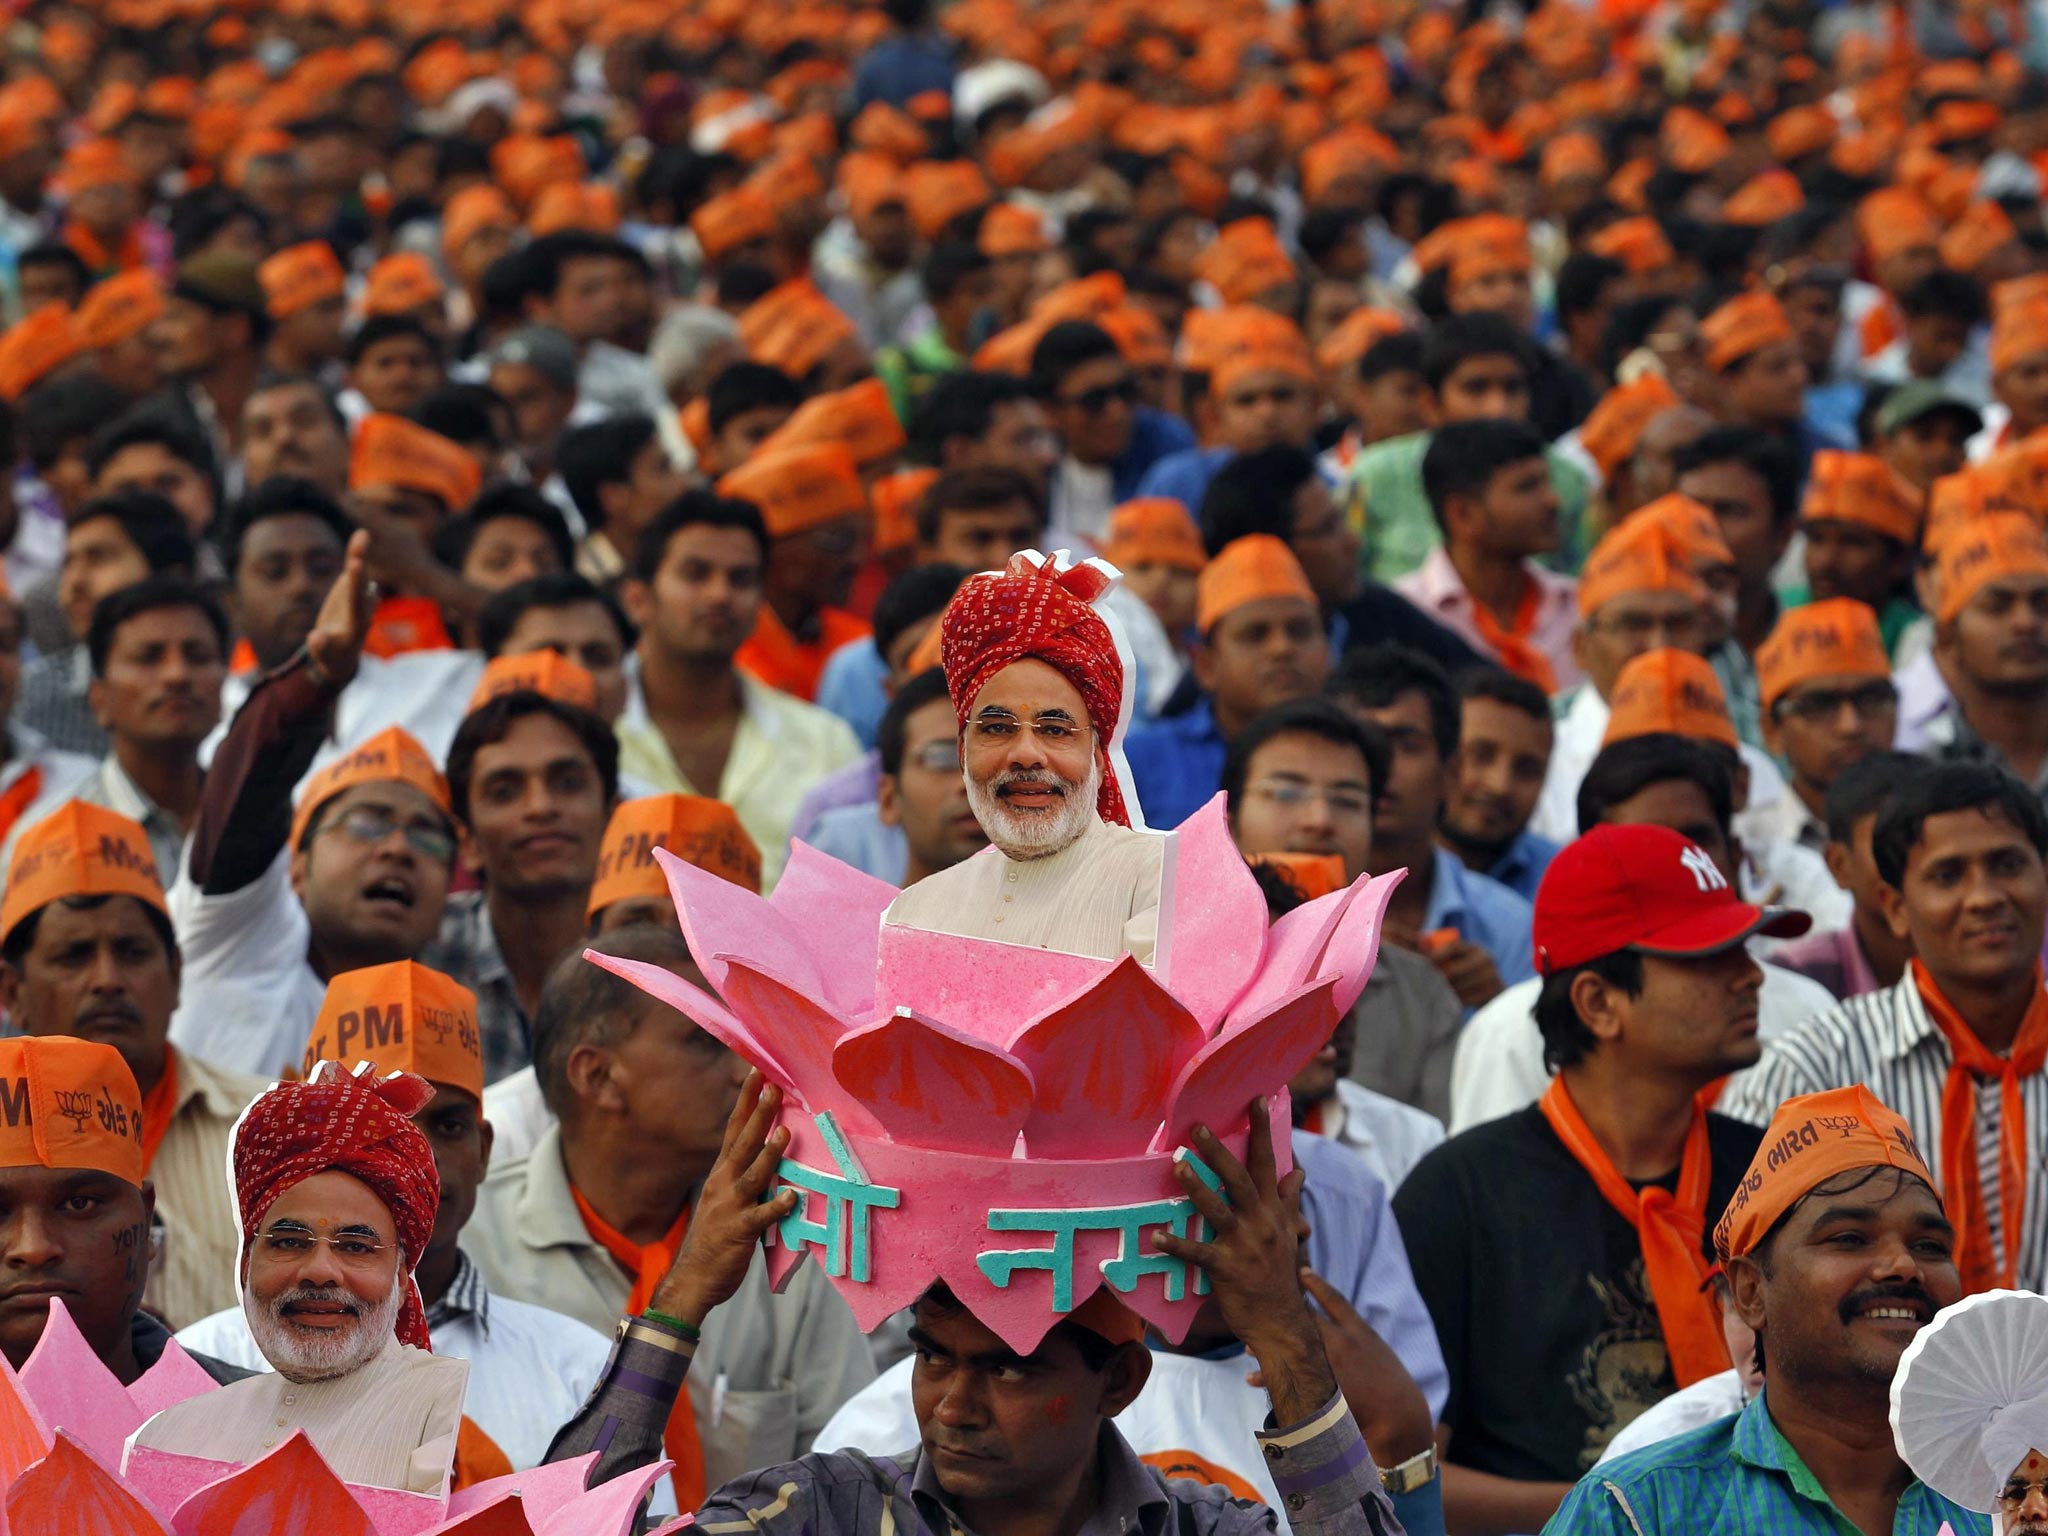 A supporter of Gujarat’s chief minister and Hindu nationalist Narendra Modi, the prime ministerial candidate for India’s main opposition Bharatiya Janata Party (BJP), wears a headgear with a portrait